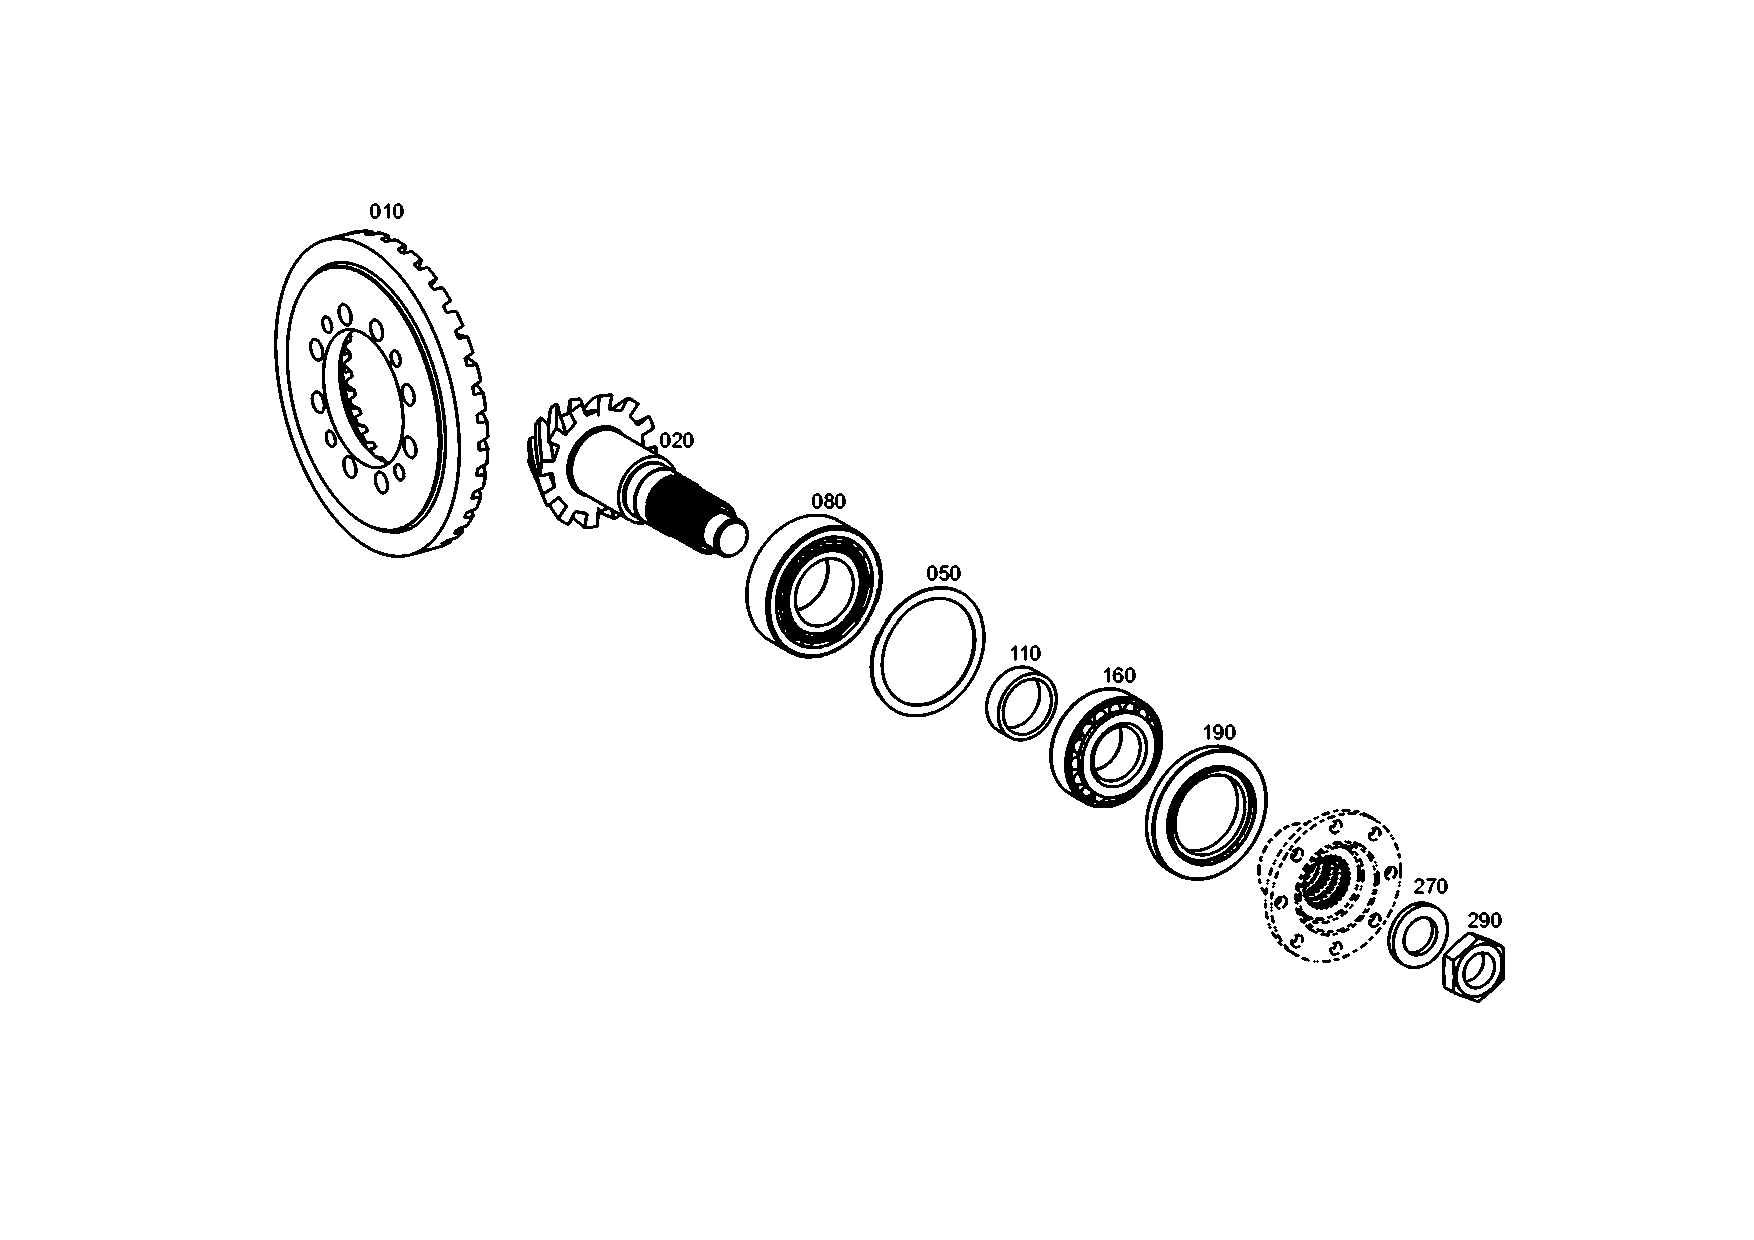 drawing for CATERPILLAR INC. 7029701 - RING (figure 3)